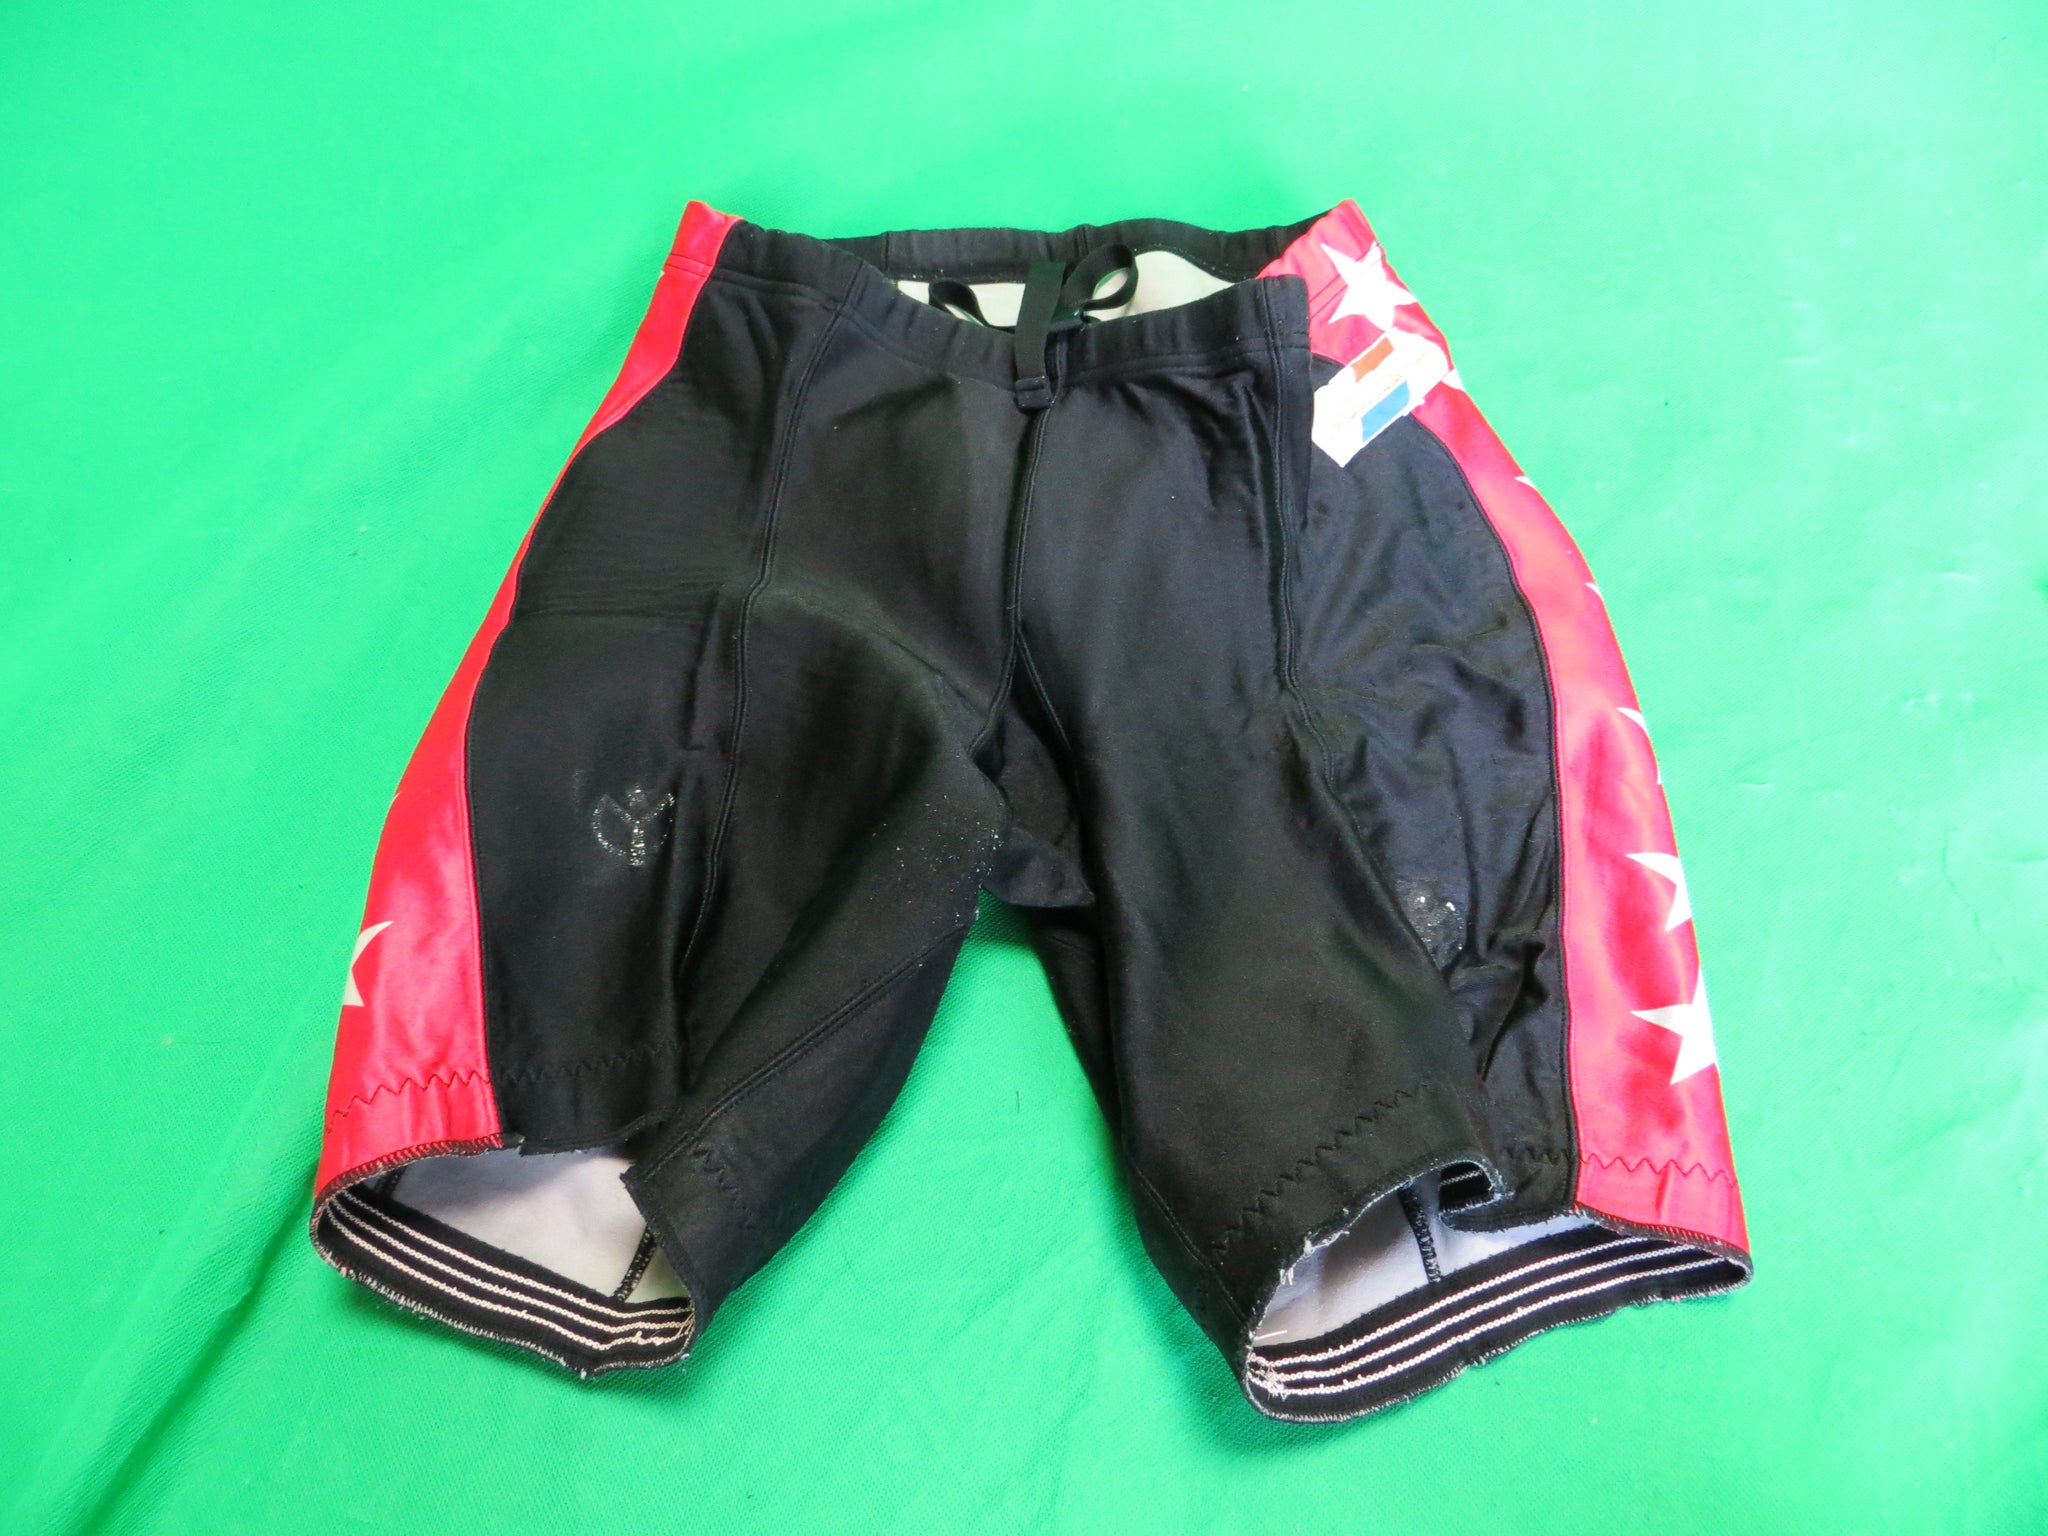 Medalist Club Authentic Keirin Shorts Japanese L Size #5 (American M)